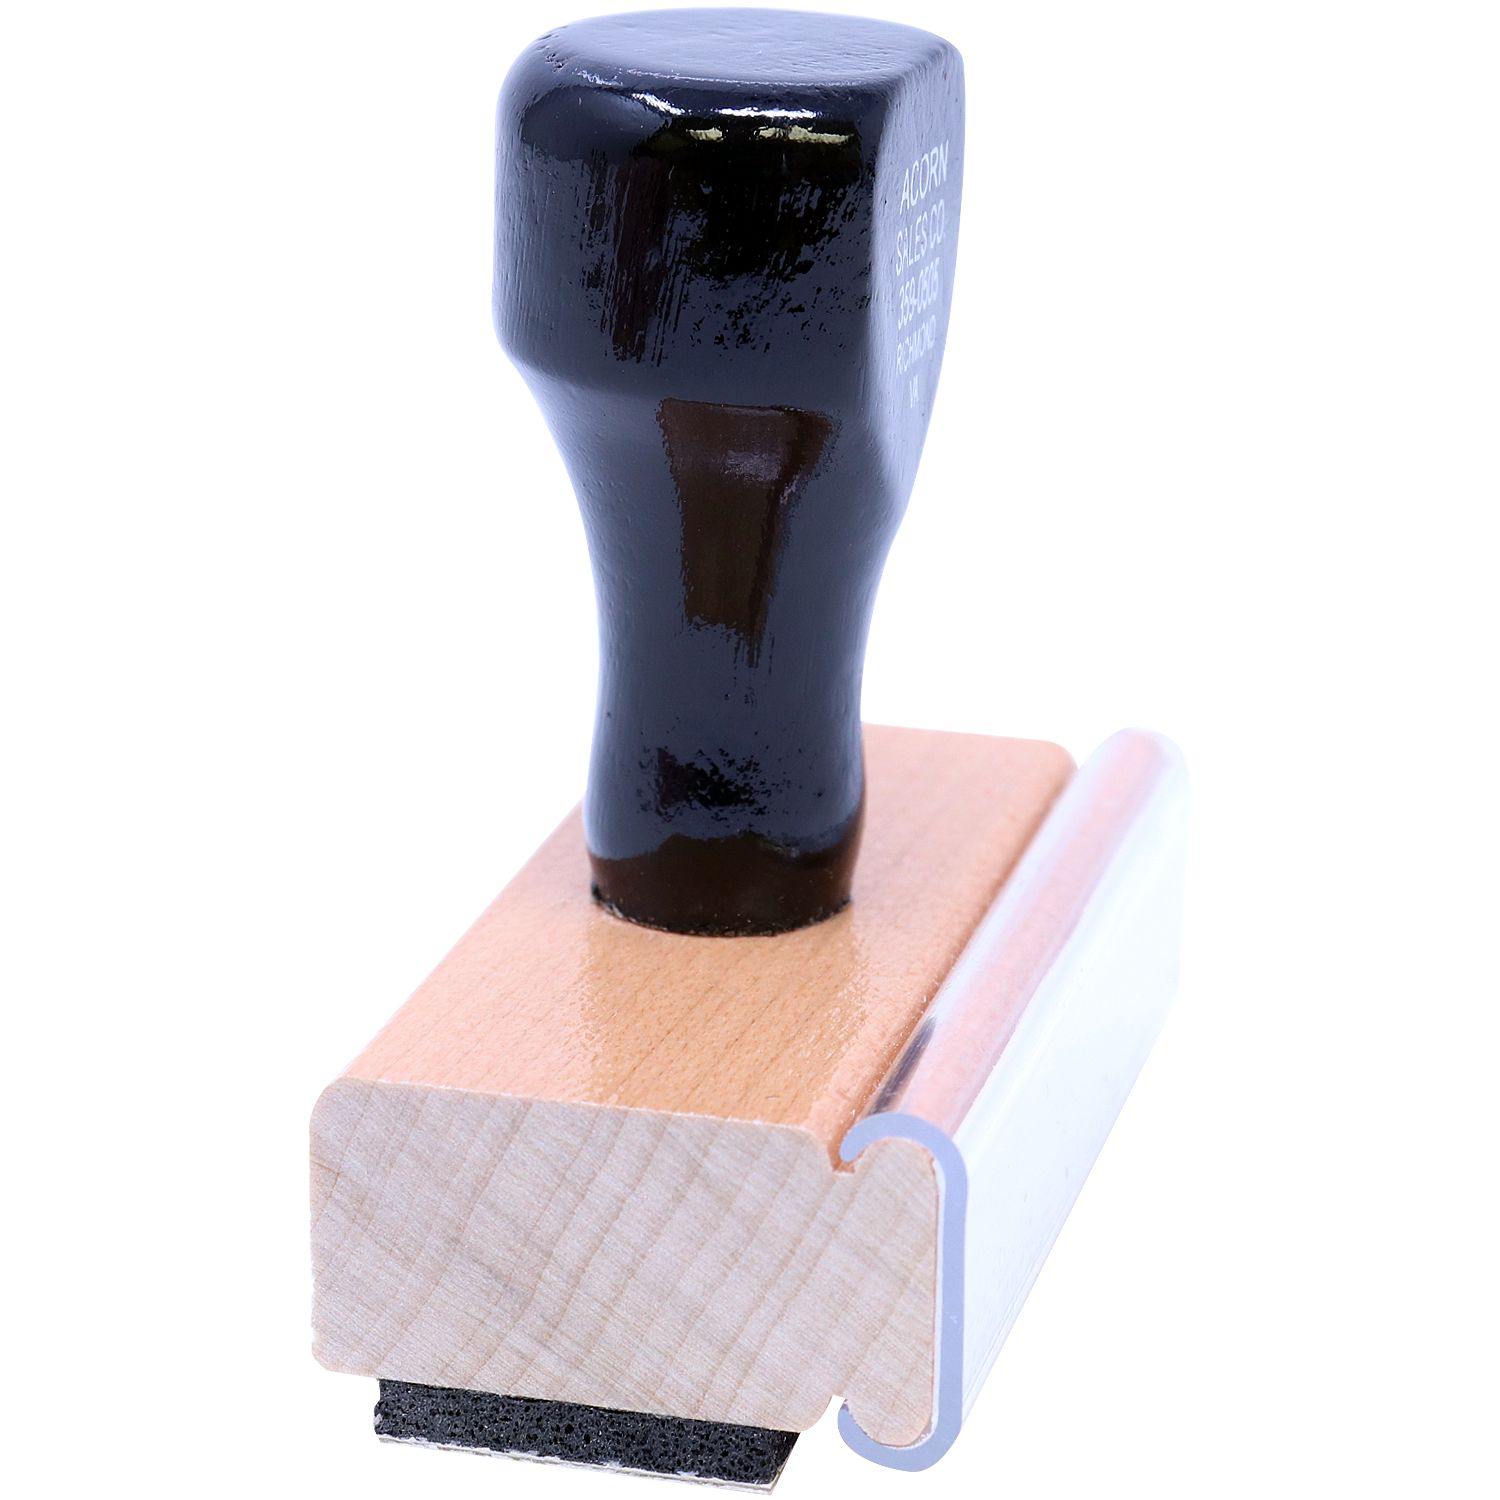 Side View of Large No Mail Receptacle Rubber Stamp at an Angle